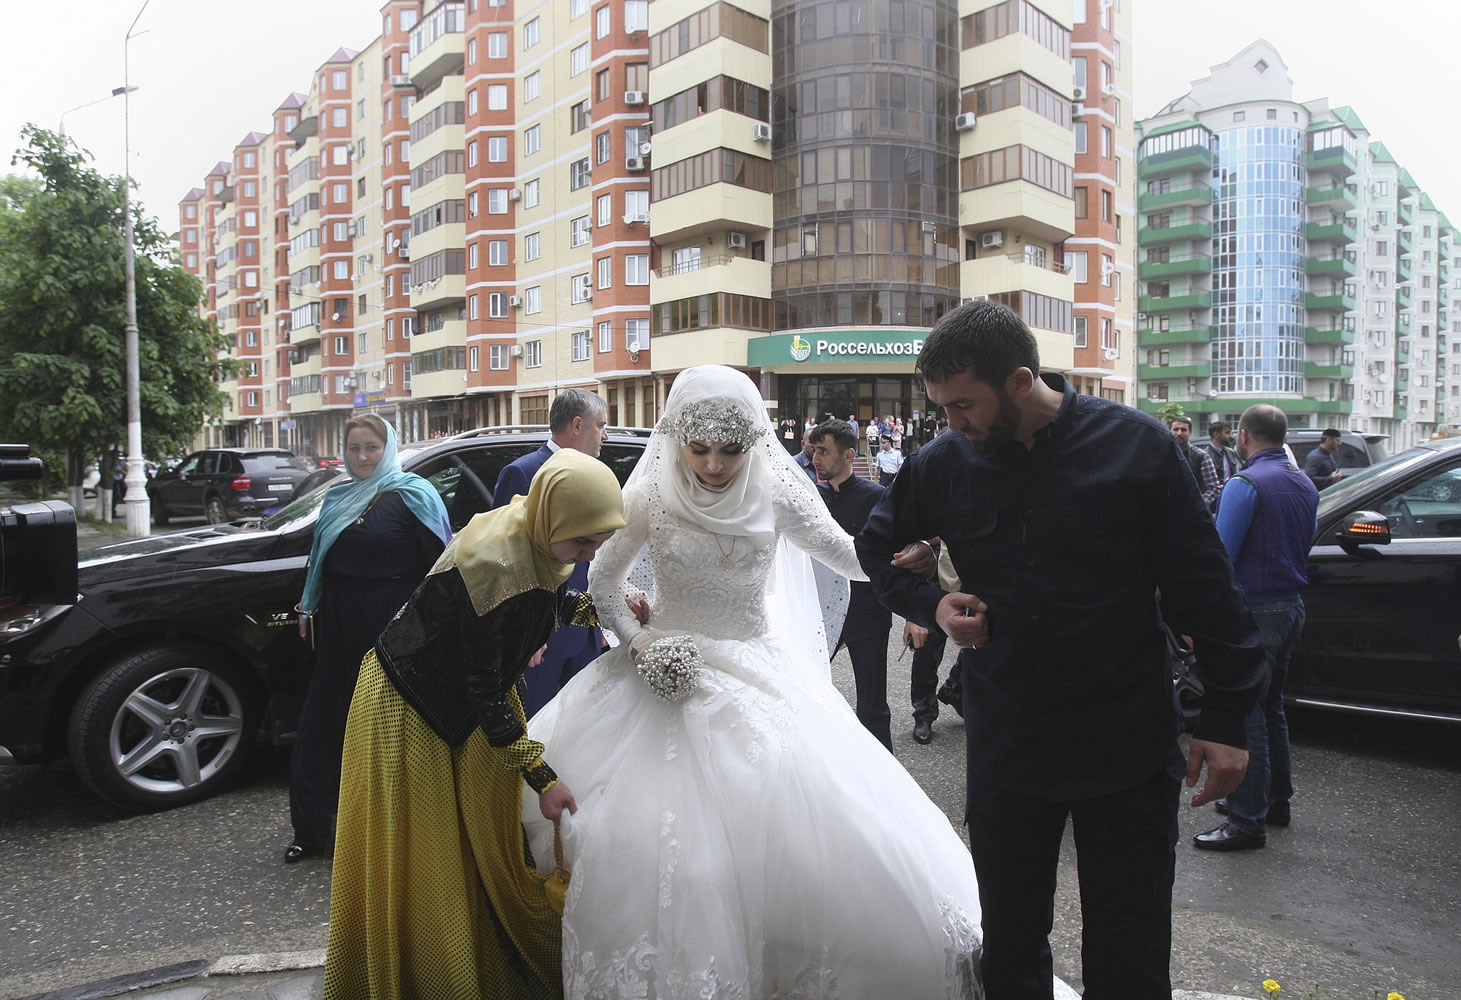 A bride, Chechen Kheda Goilabiyeva, is taken by head of the Chechen leader's administration, Magomed Daudov, to a wedding registry office for her wedding with Chechen police officer Nazhud Guchigov, in Chechnya's provincial capital Grozny, Russia, on Saturday.